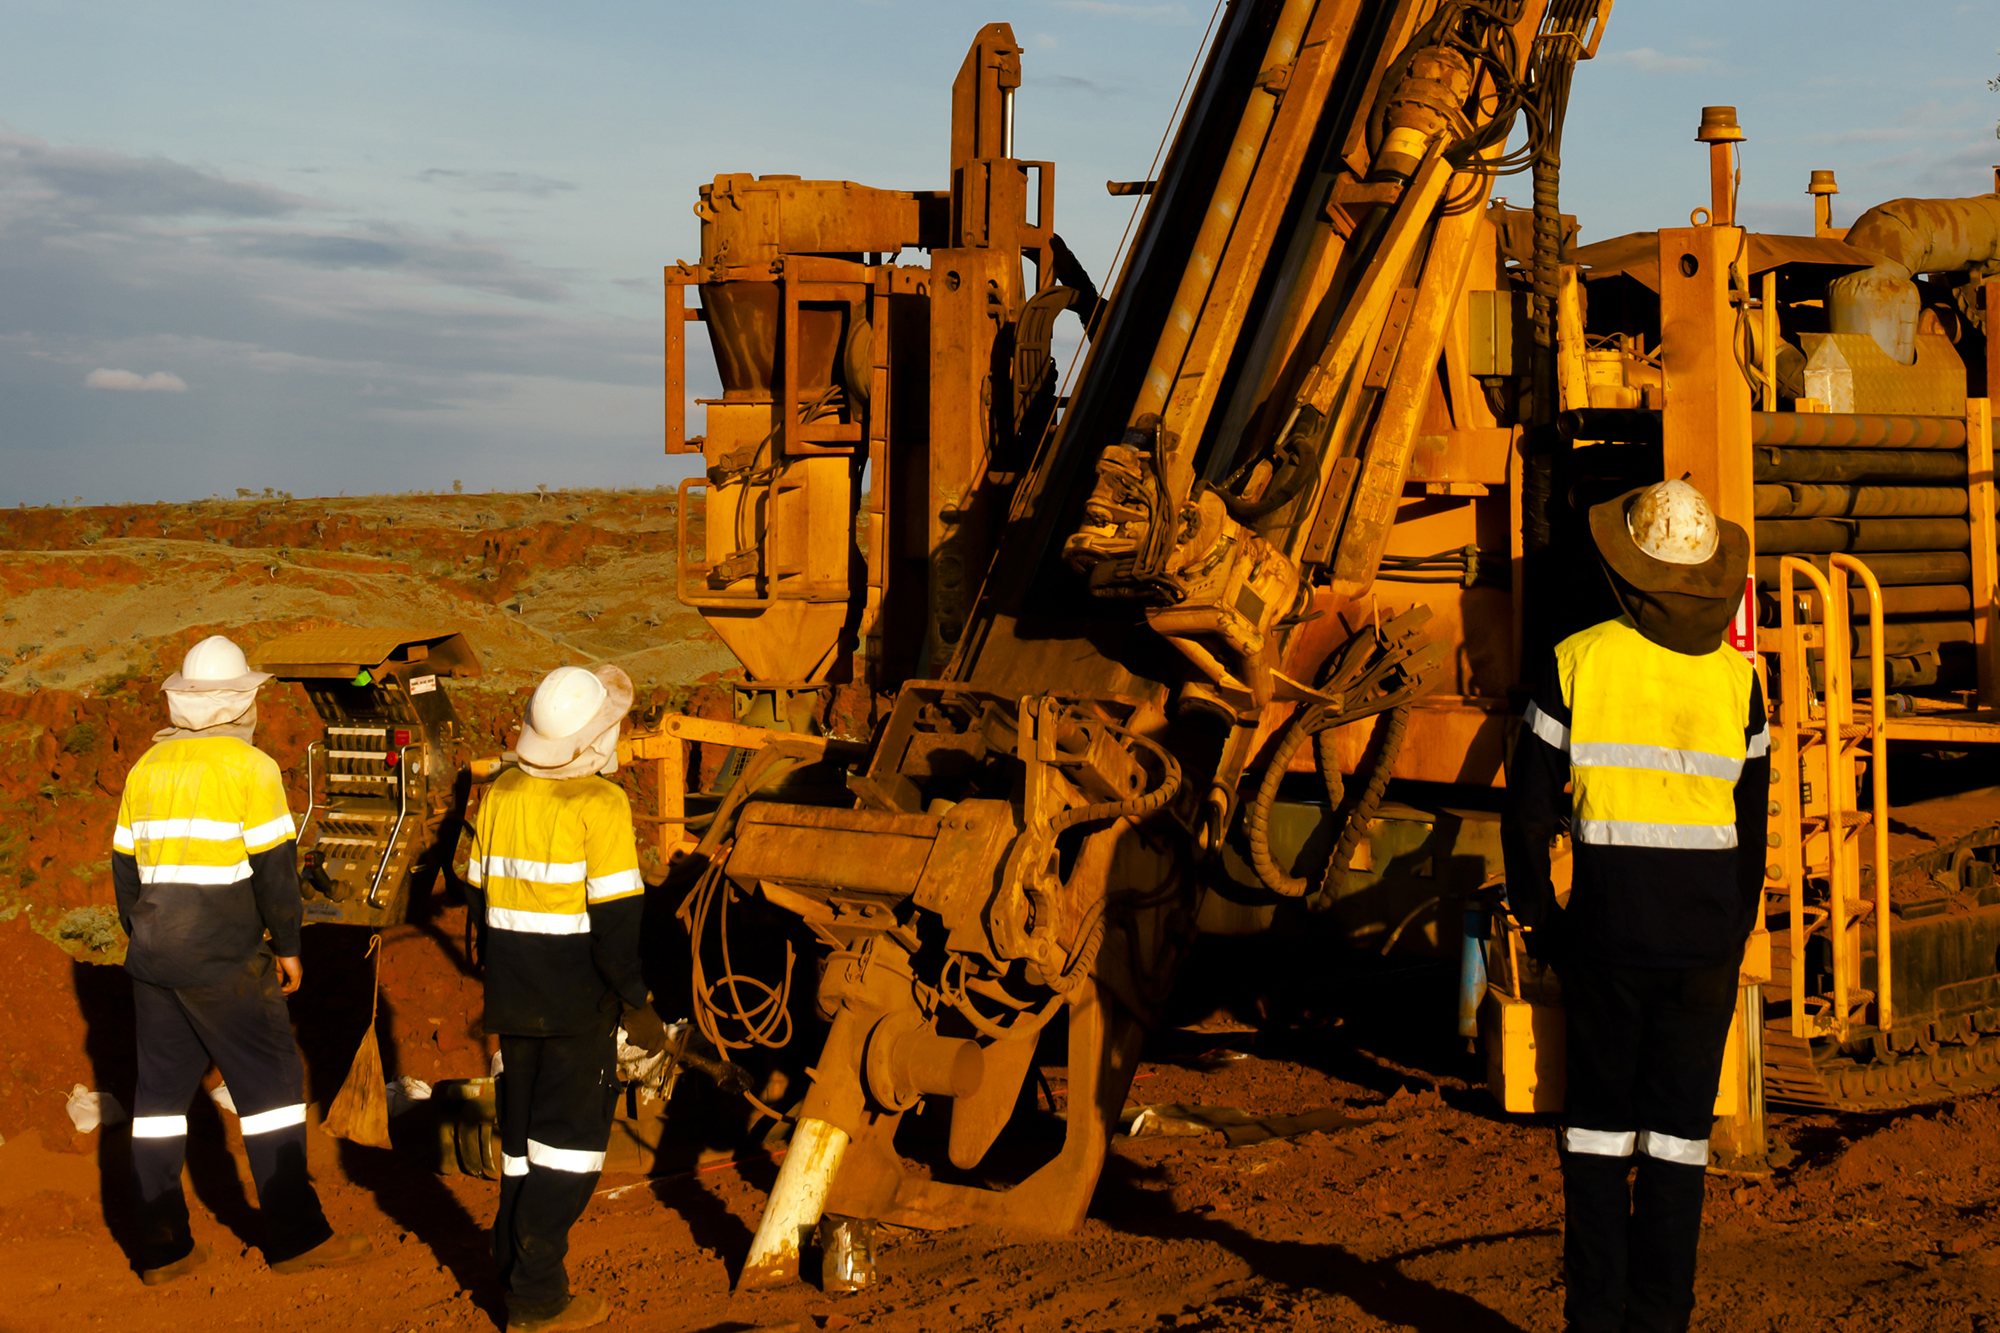 Three employees operating an exploration drill rig in the outback Pilbara region of Australia.